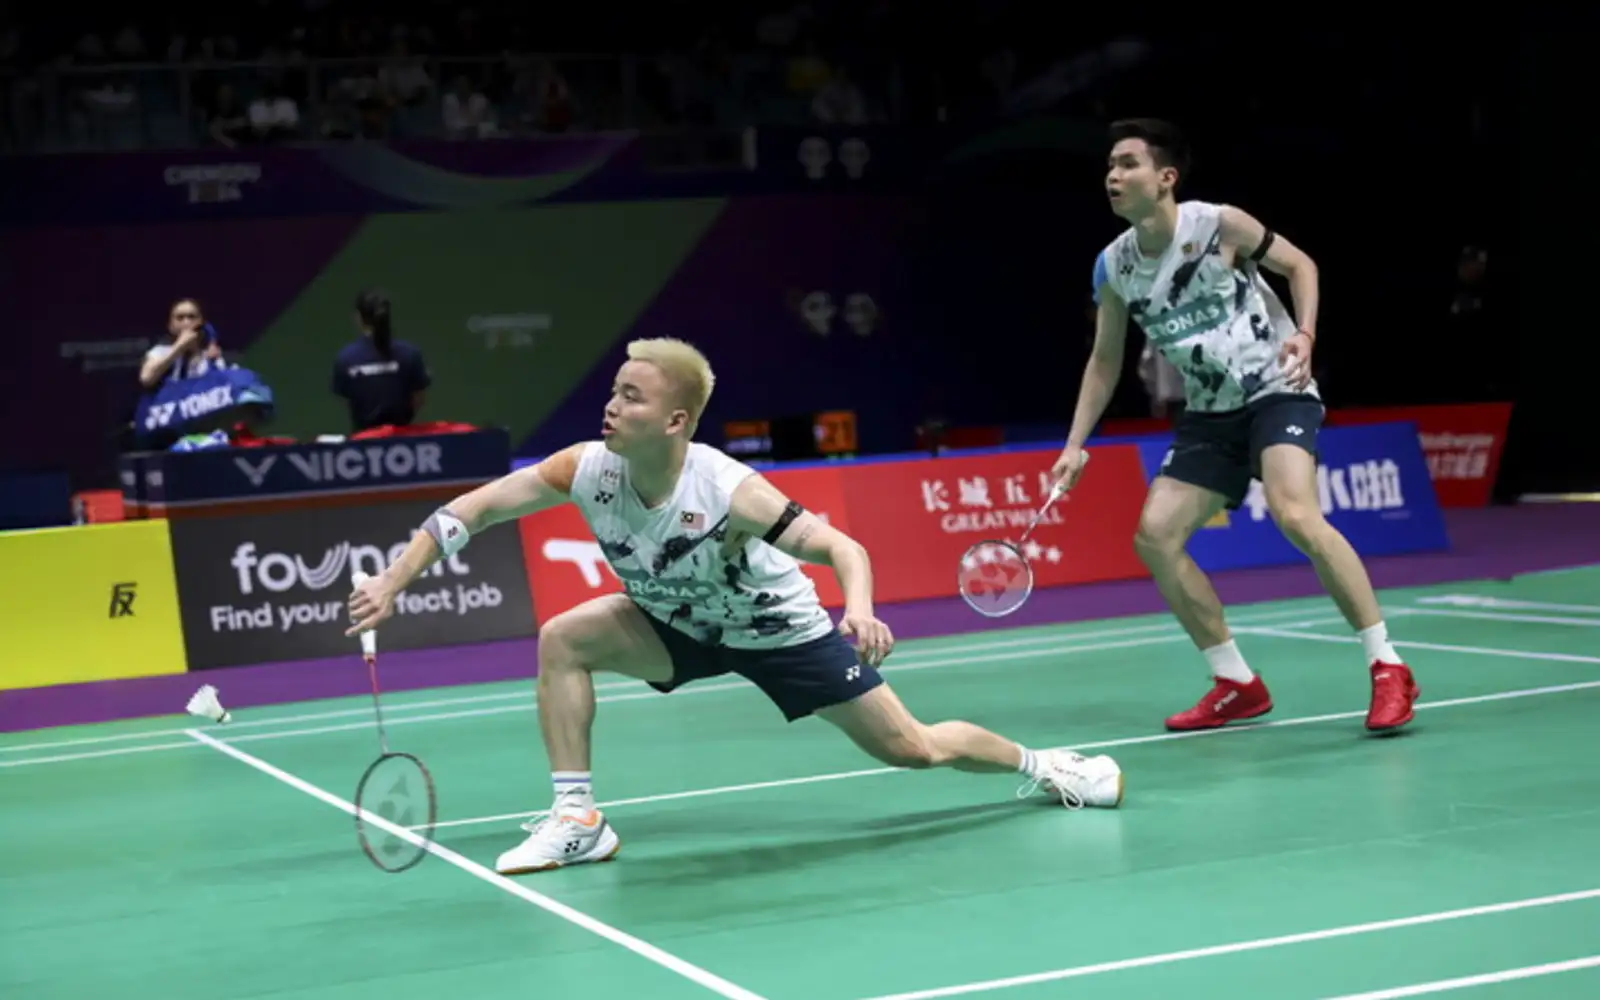 Denmark edge Malaysia 3-2 in Thomas Cup group match